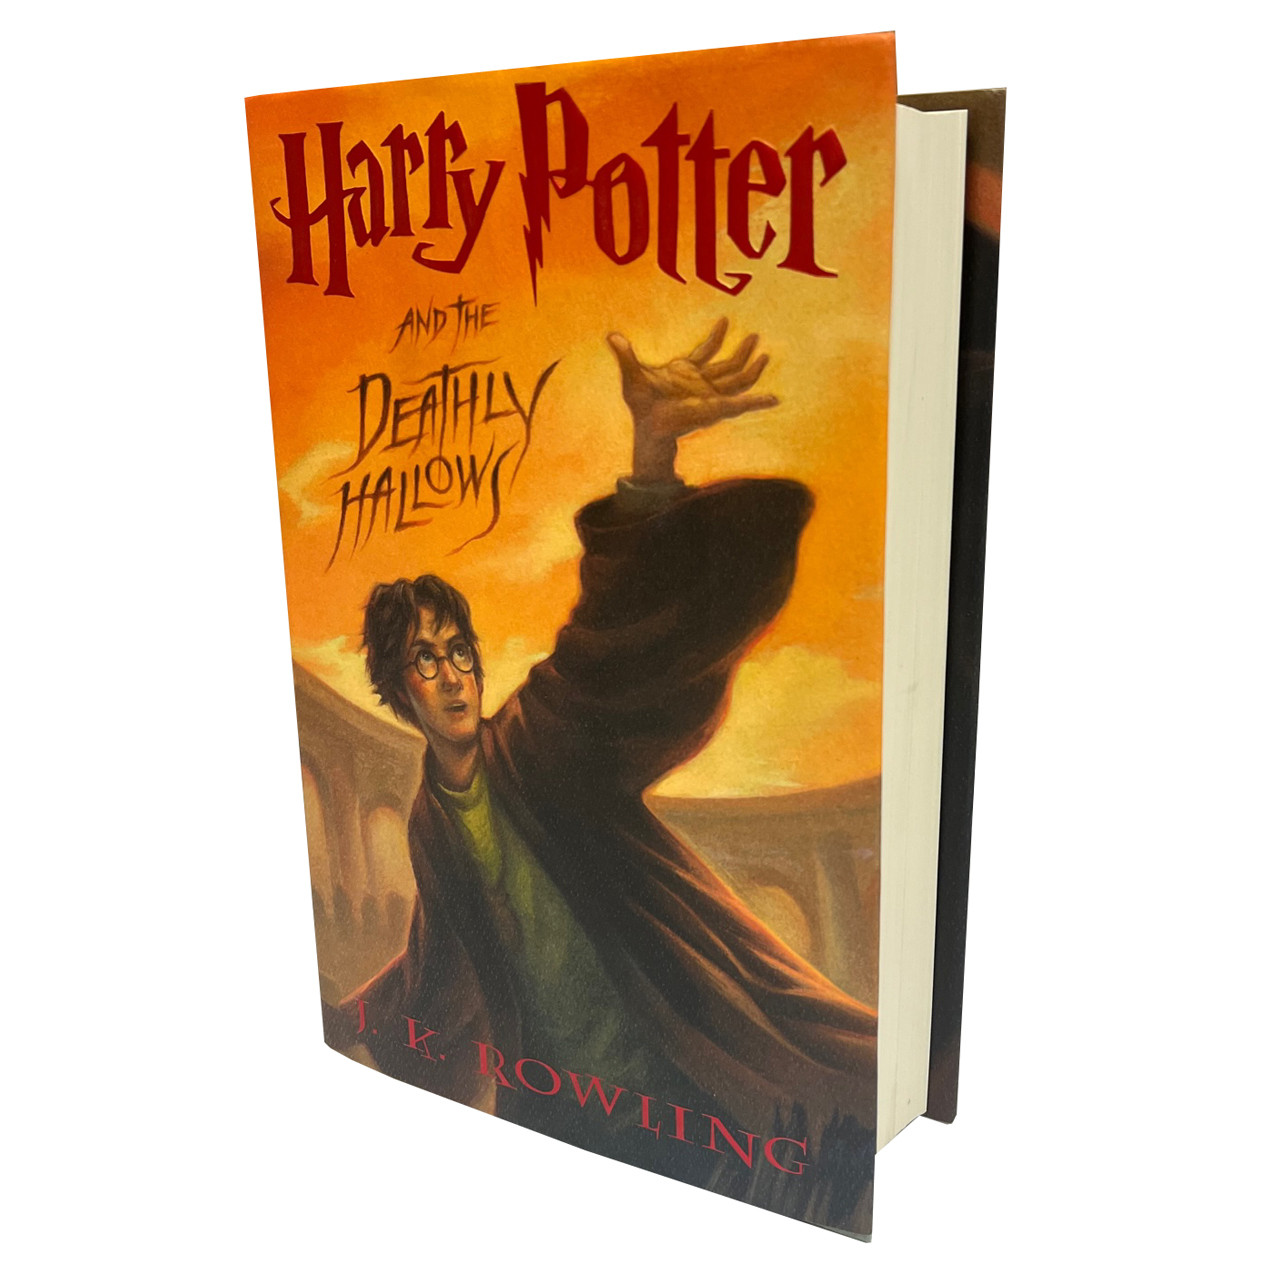 J.K. Rowling "Harry Potter and the Deathly Hallows" Signed First Edition/Second Printing w/Hologram Authenticity Sticker